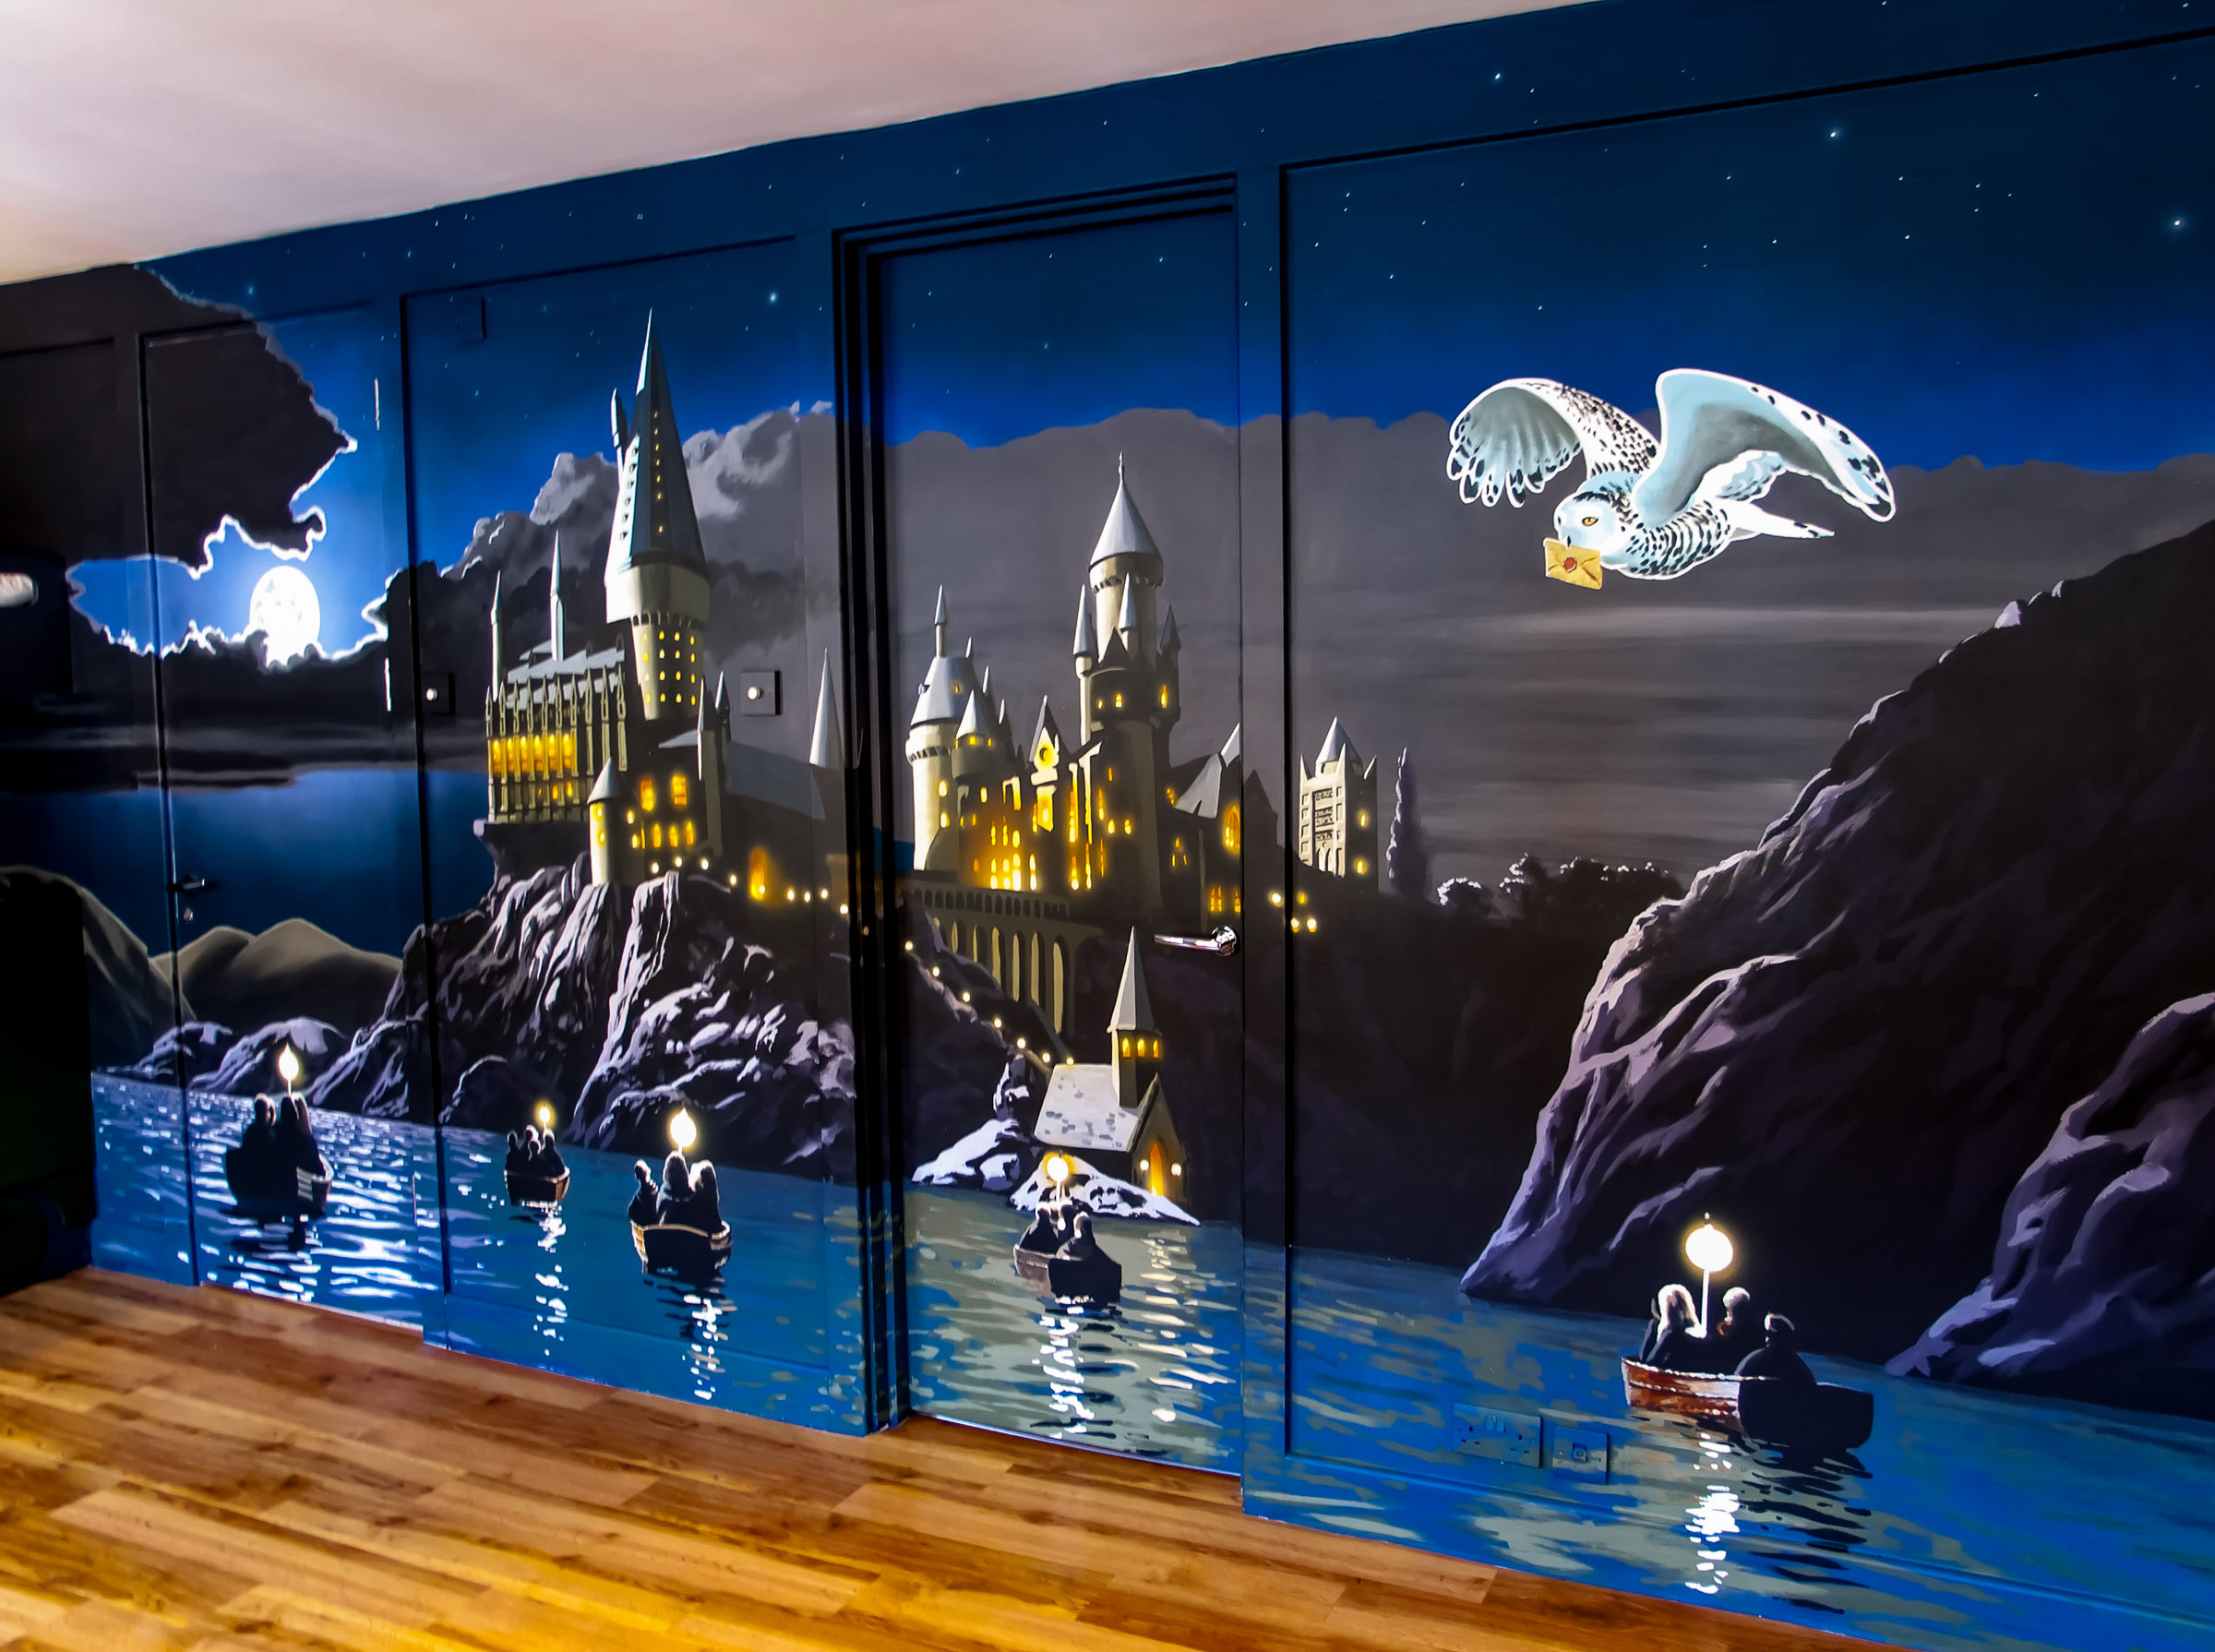 Mural of Hogwarts, Harry Potter, from the lake in moonlight, making the most of the space by concealing the doors and frames